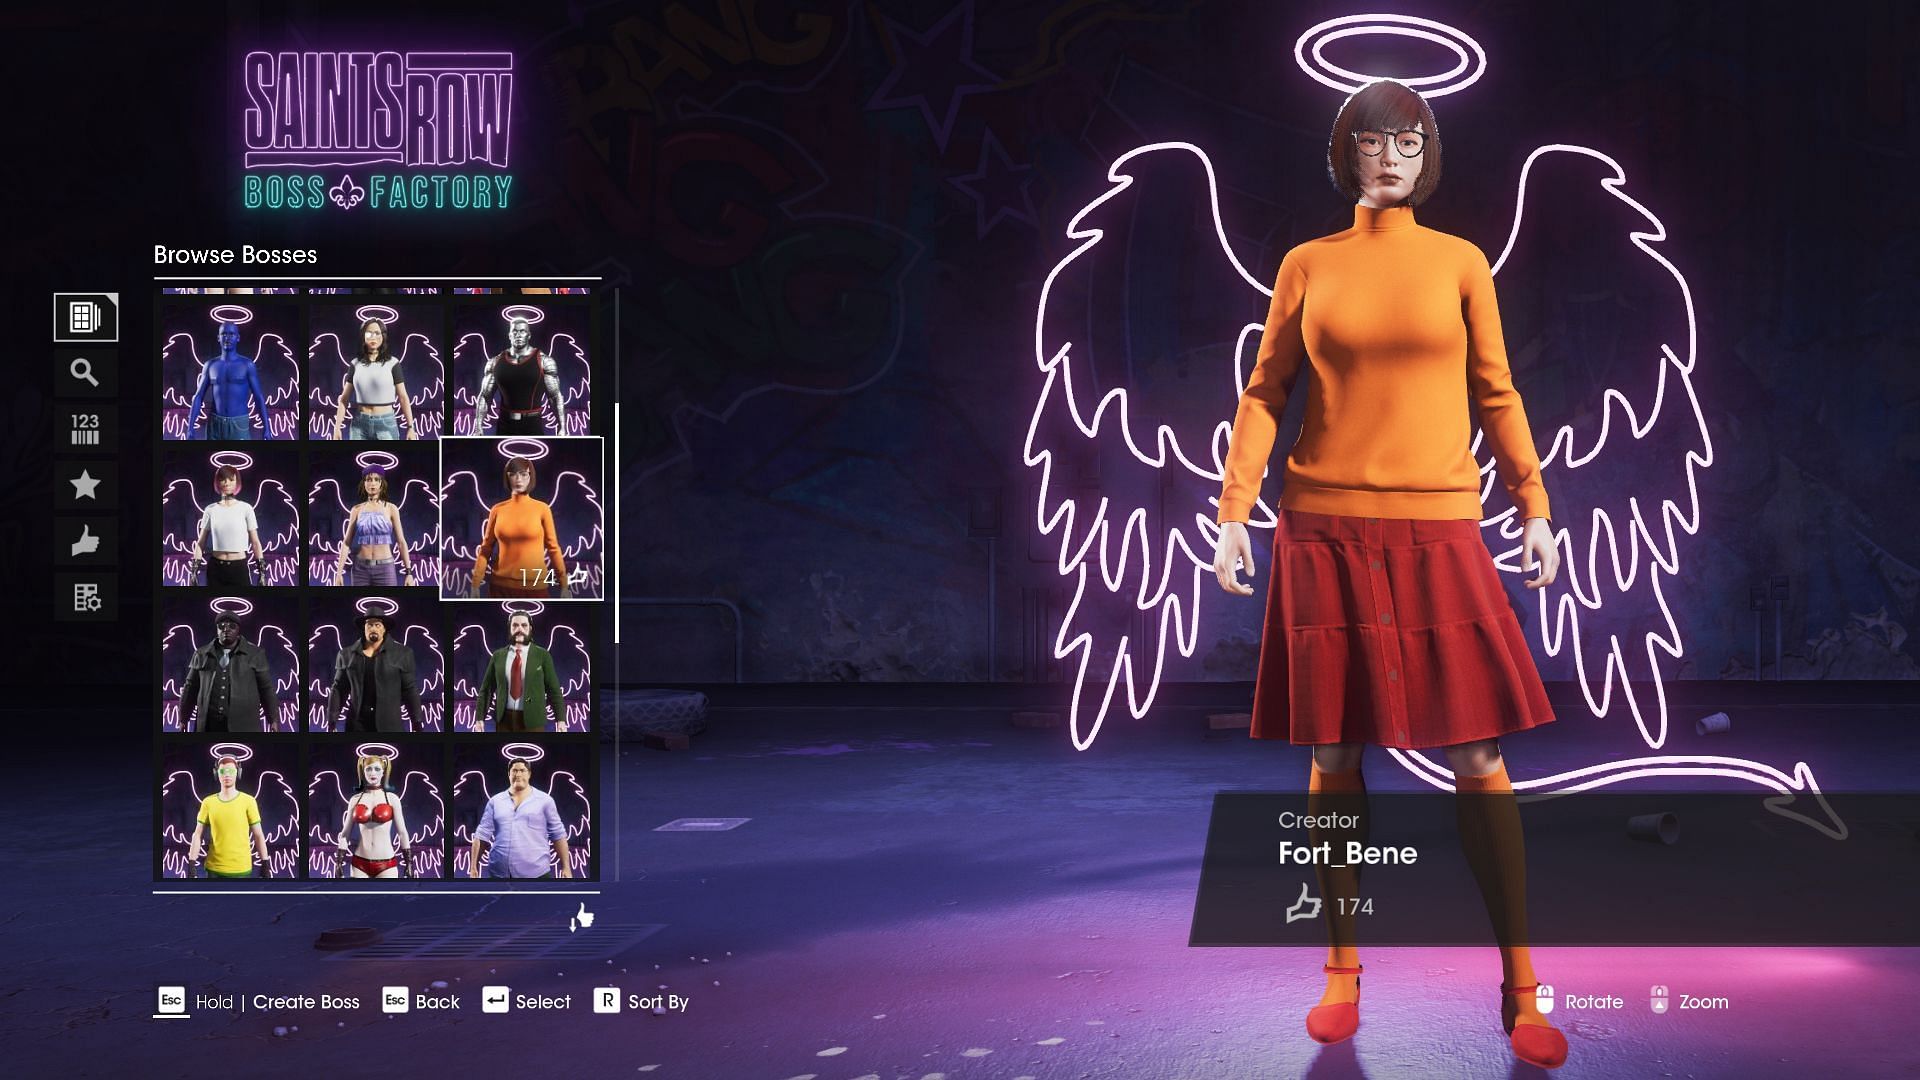 Players can get pretty creative (Screenshot from Saints Row: Boss Factory demo)